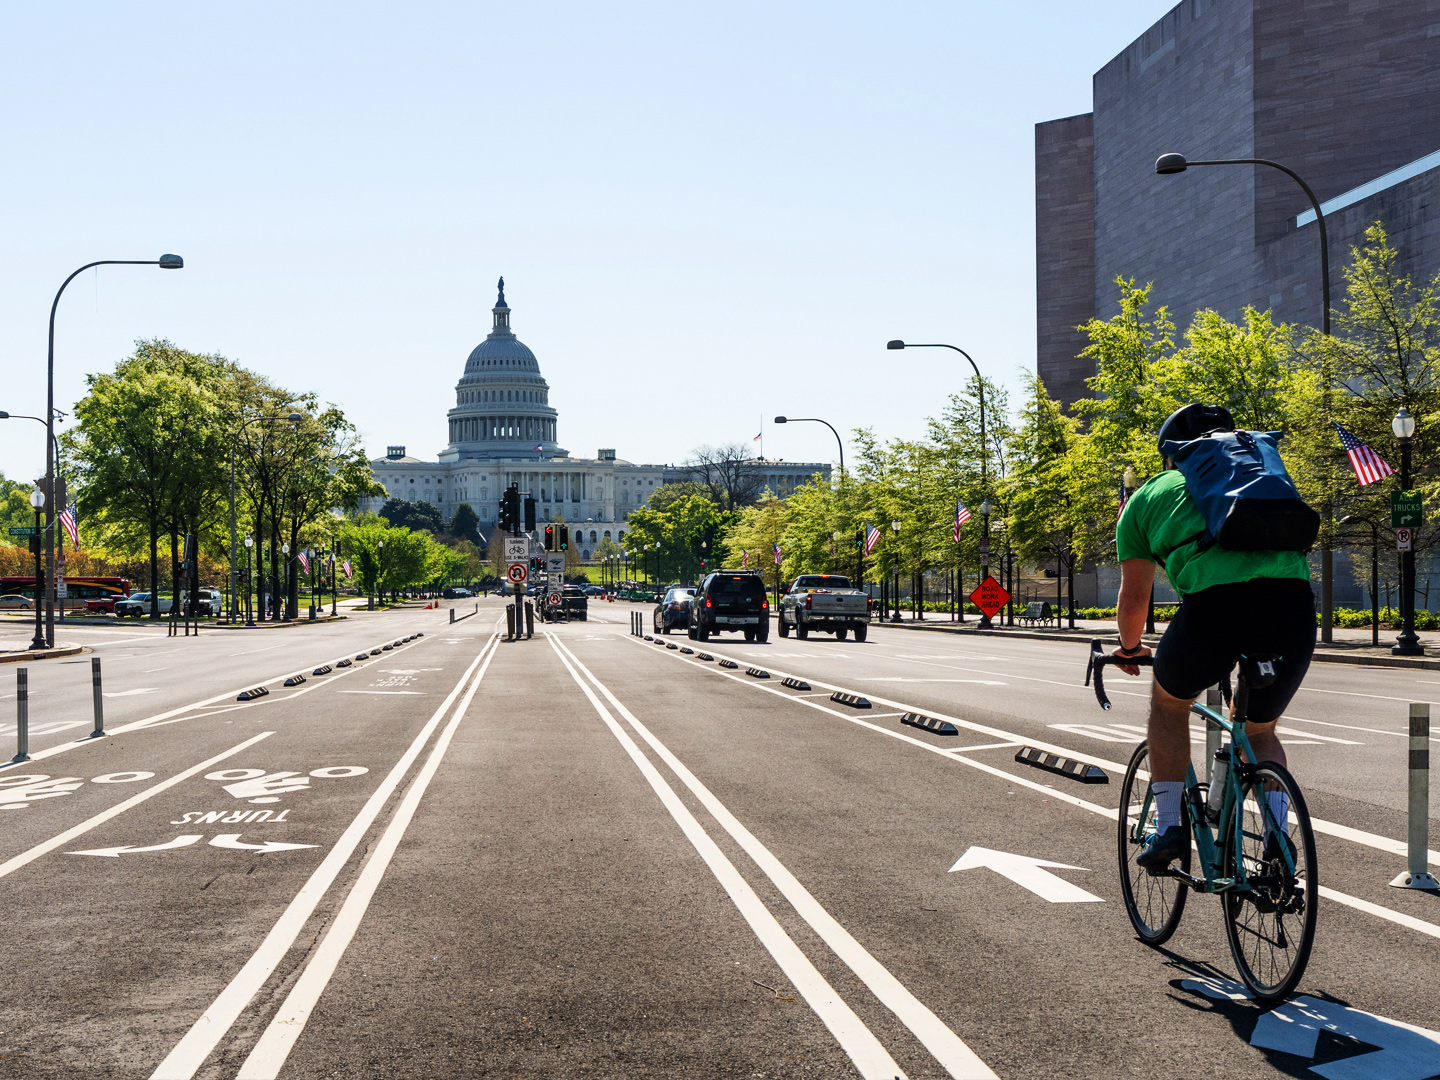 In the foreground a cyclist wearing a green shirt and black shorts rides down Pennsylvania Ave toward the White House.